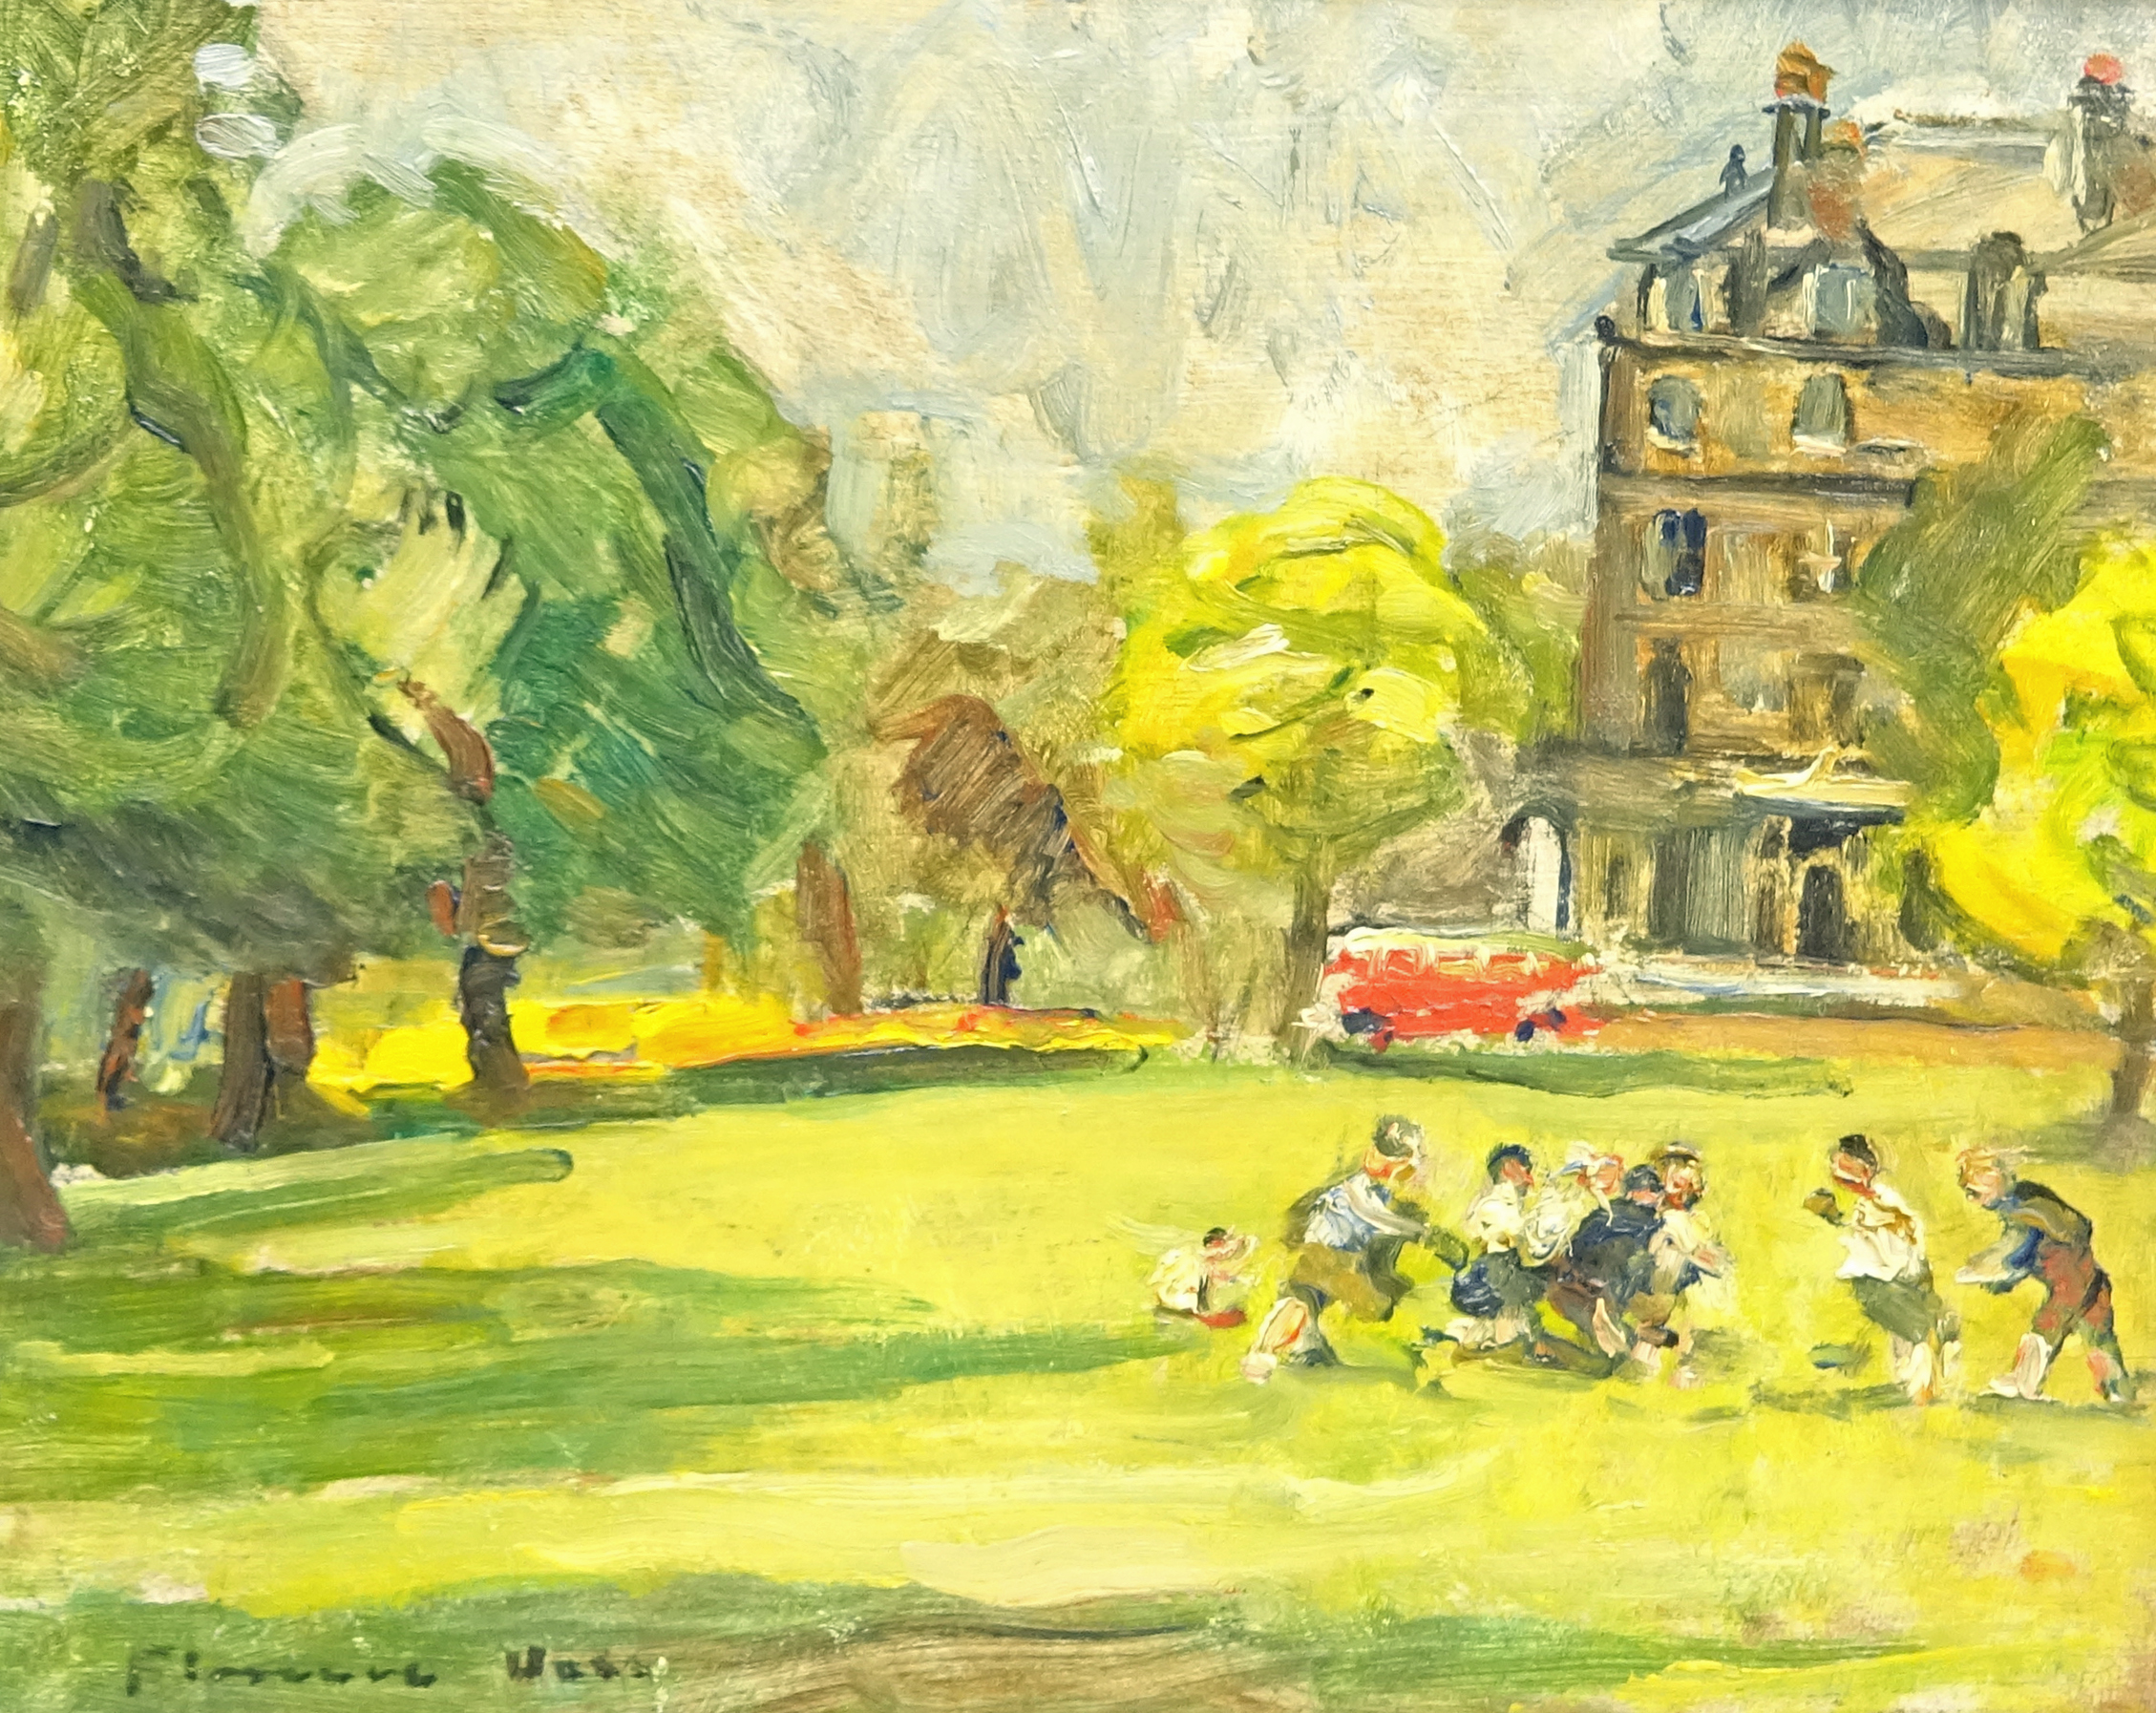 Florence Adelina Hess (Staithes Group 1891-1974): Children Playing in Prince of Wales Park